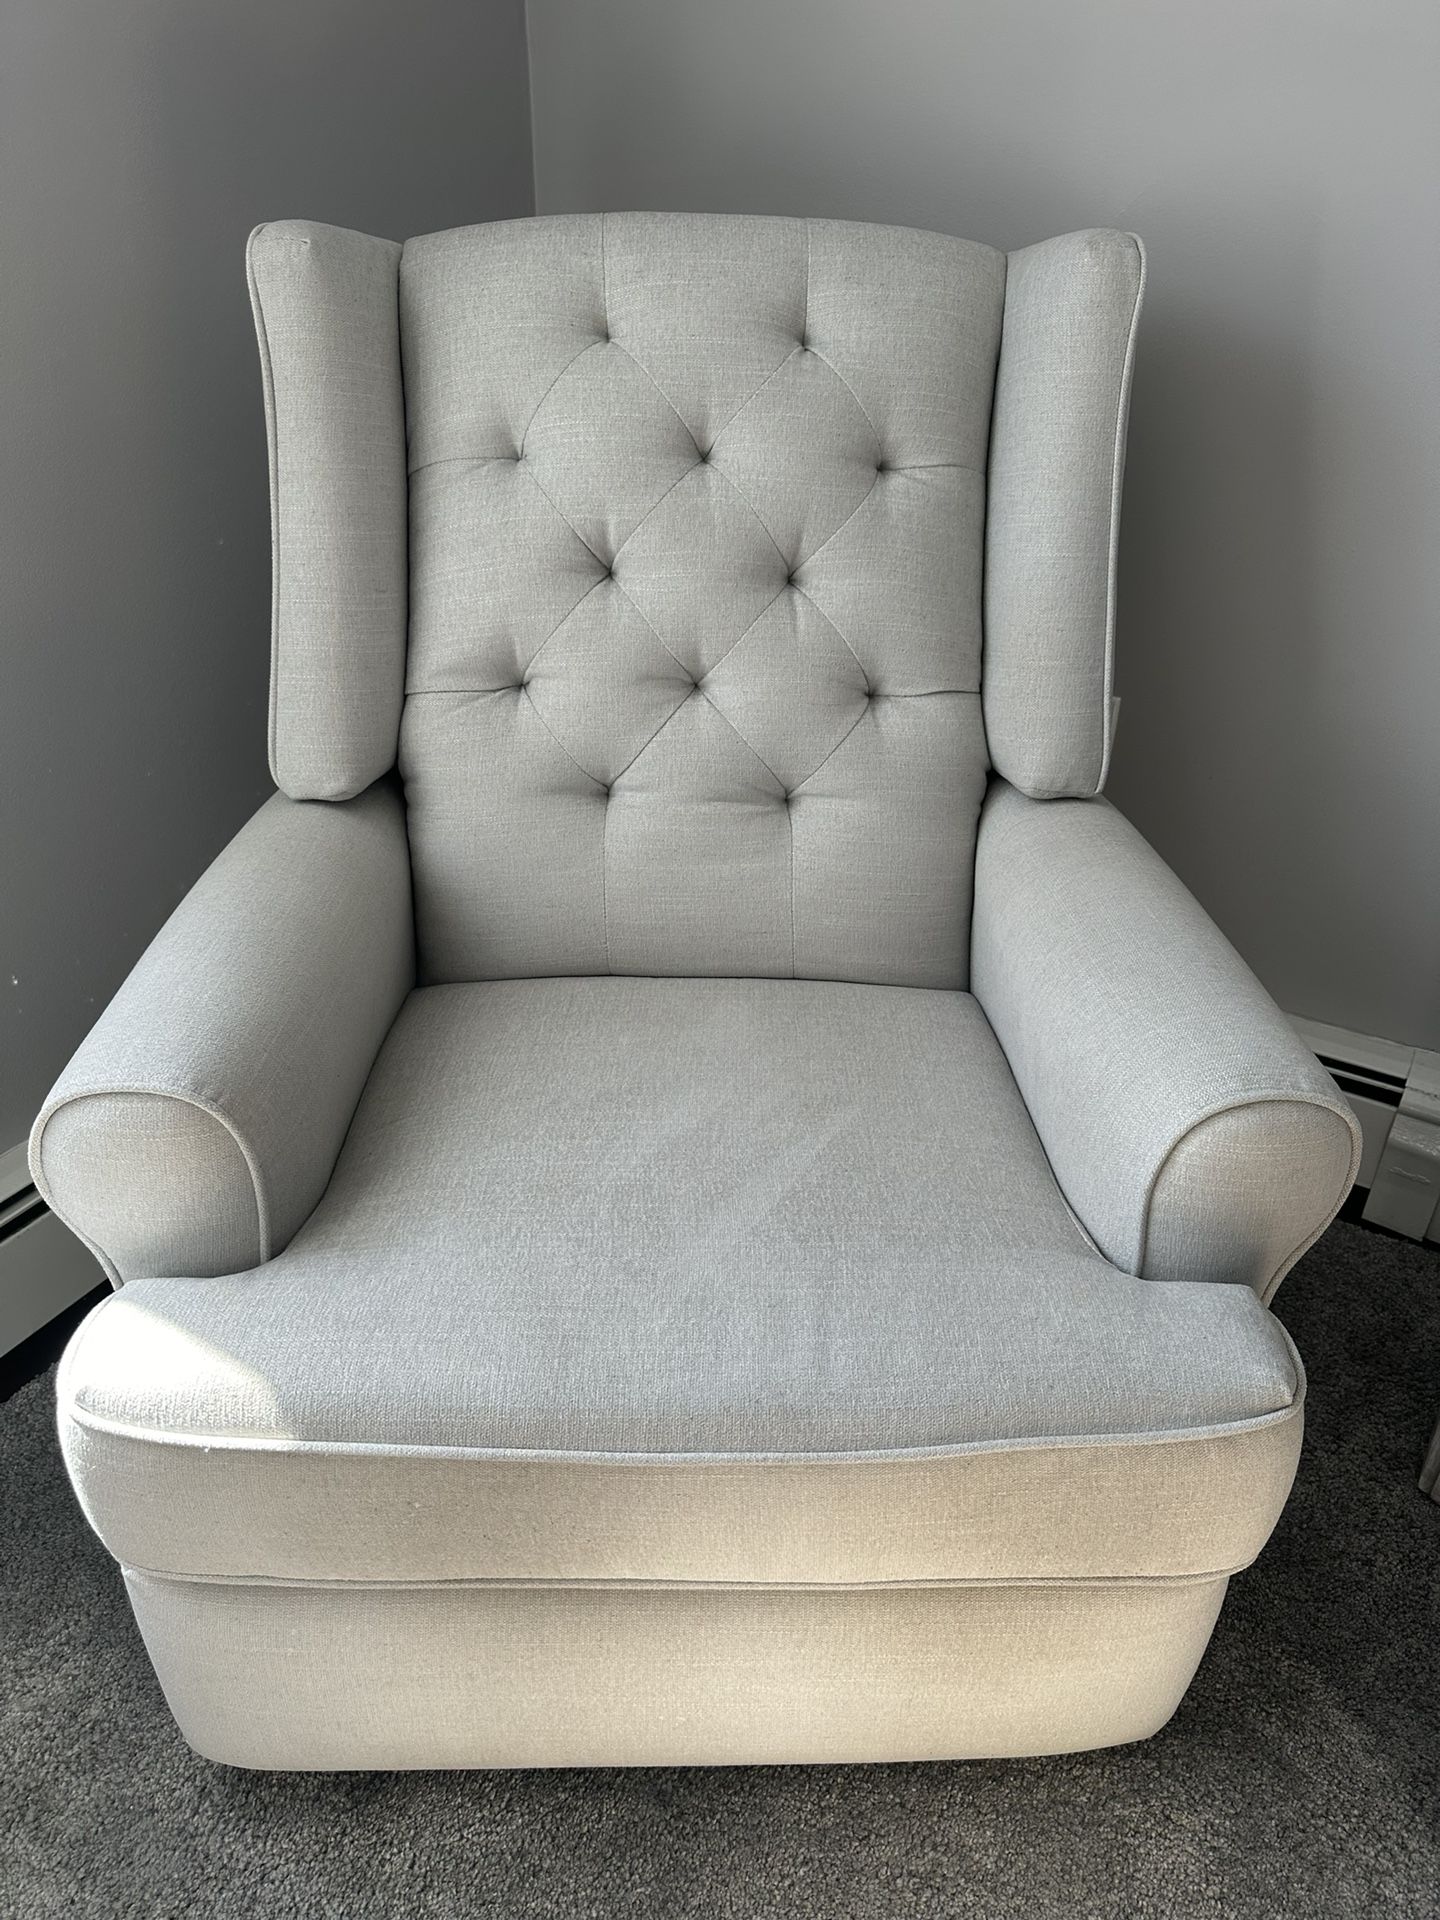 🌟 For Sale: Grey Swivel Reclining Glider - Perfect for Your Nursery! 🌟